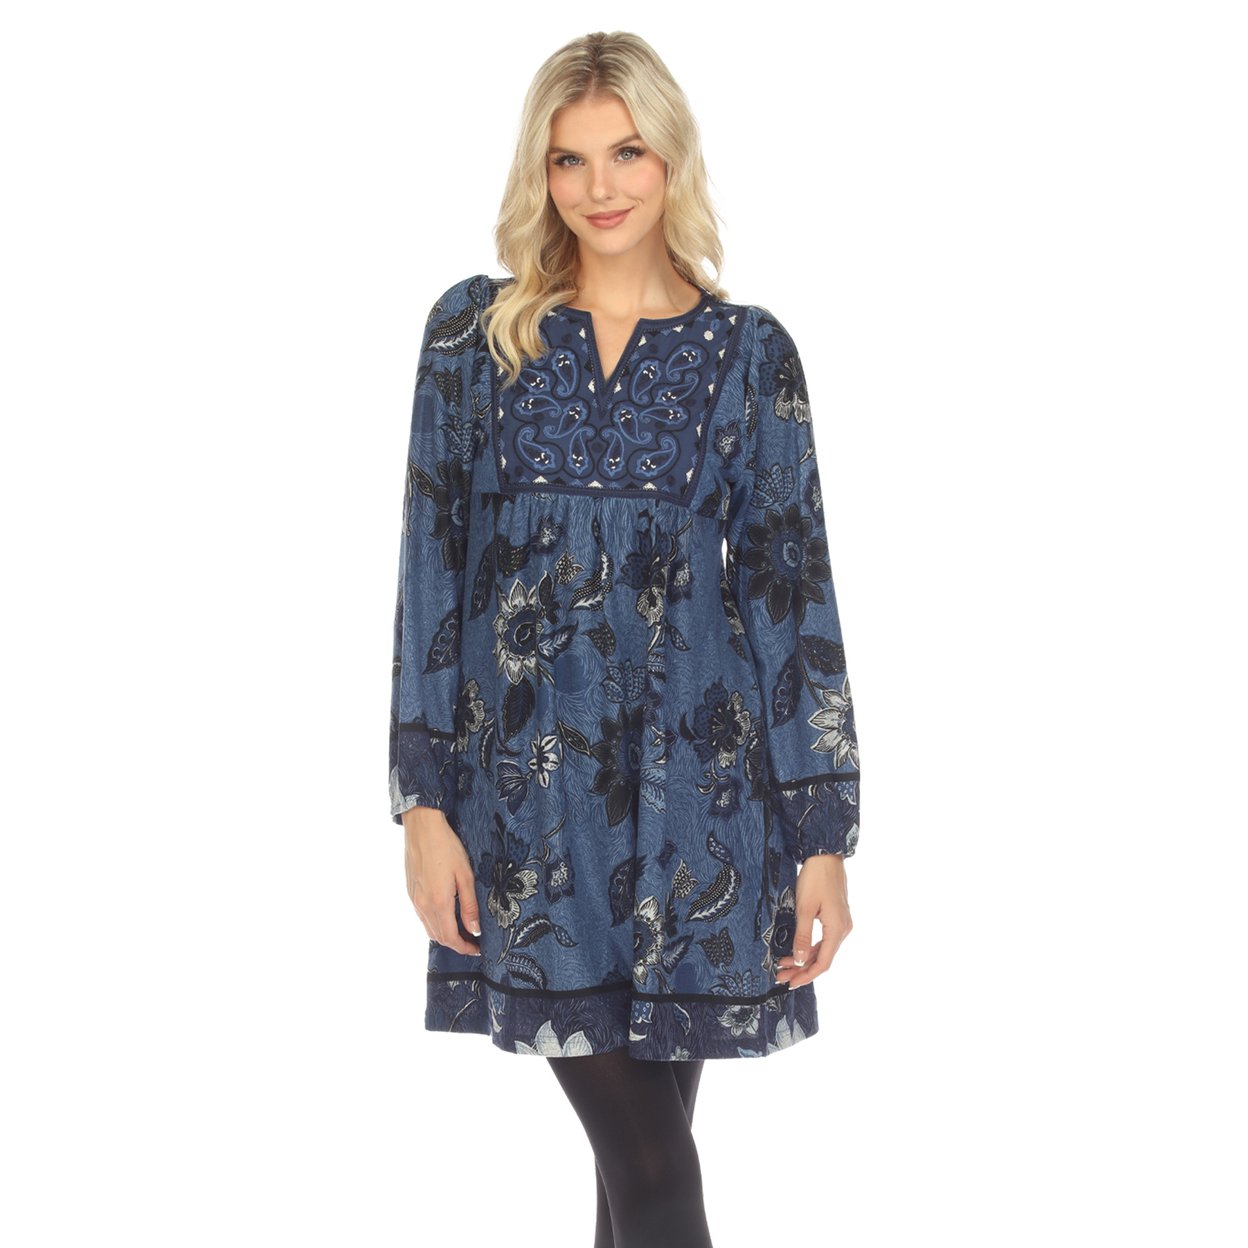 White Mark Women's Floral Paisley Sweater Dress - Blue, Large